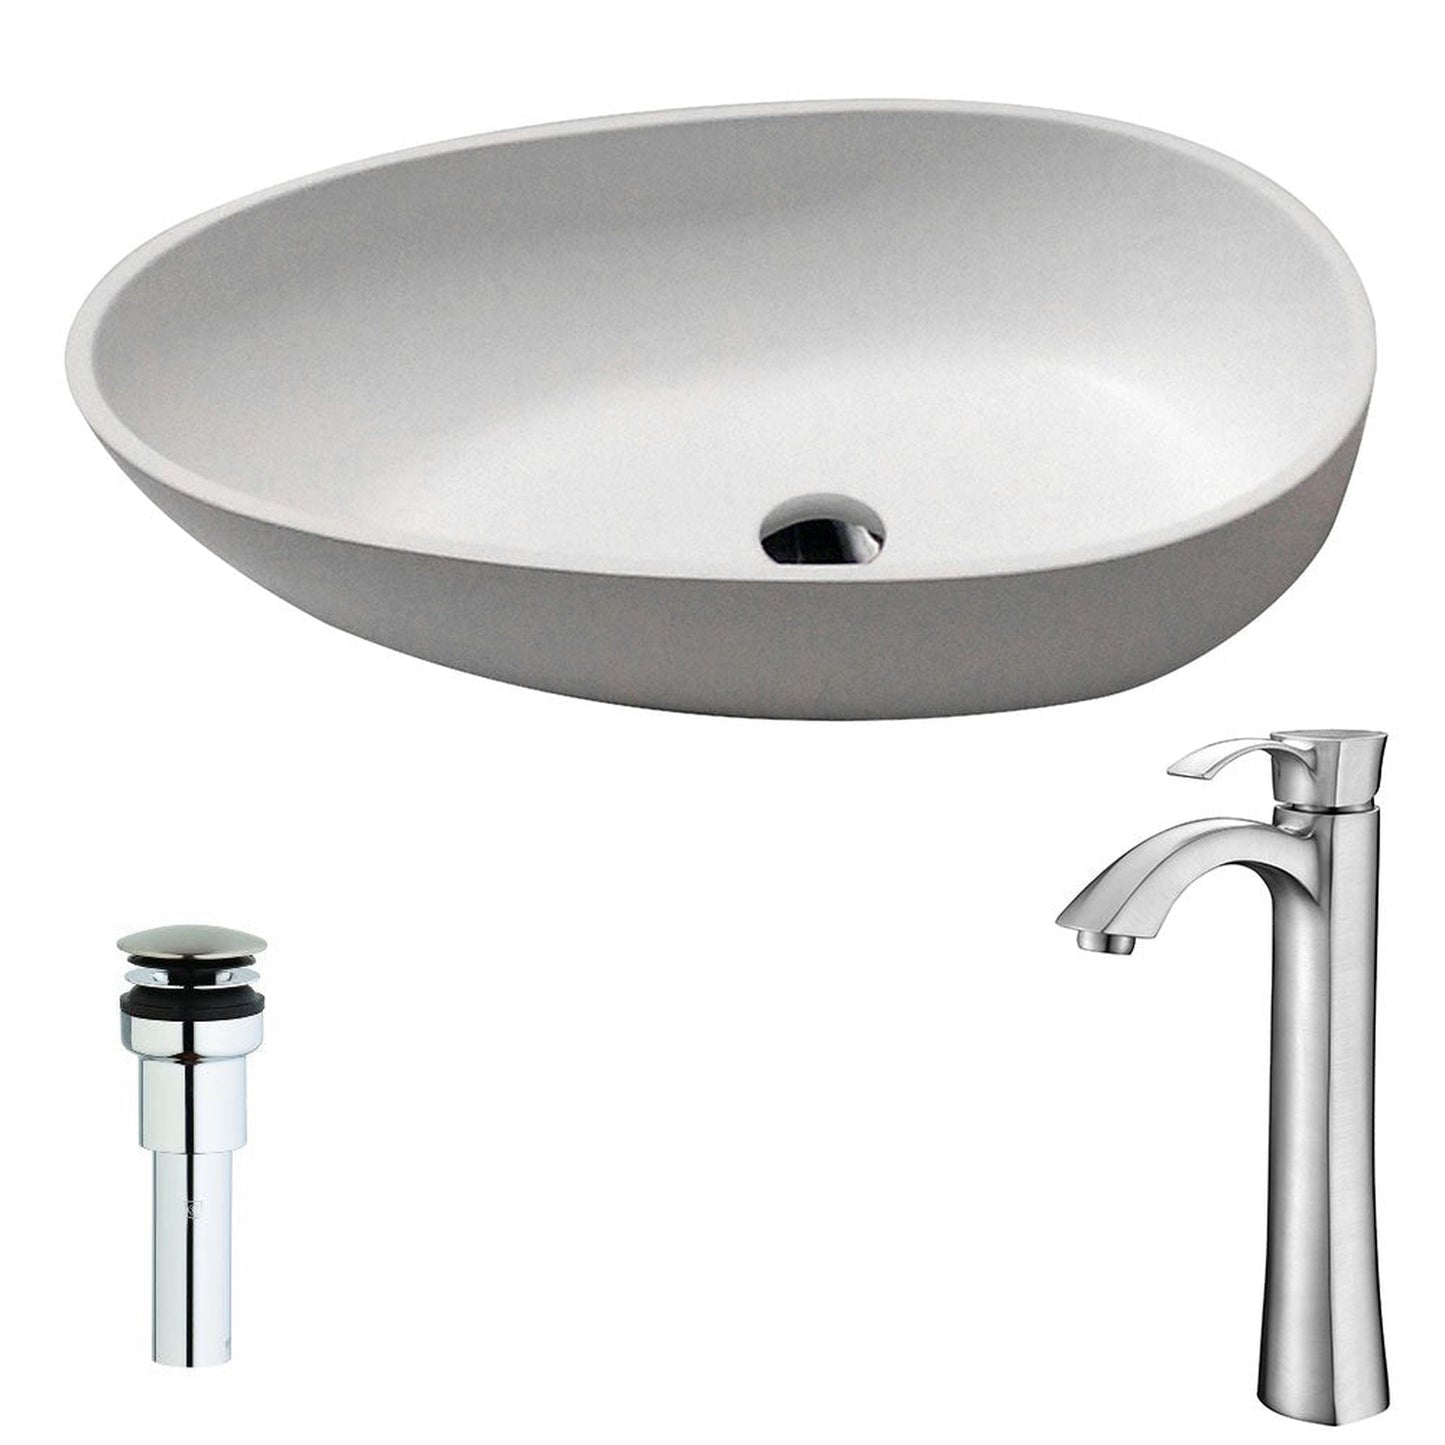 ANZZI Trident Series 24" x 16" Oval Shape Vessel Sink in Matte White Finish With Brushed Nickel Harmony Vessel Faucet and Pop-up Drain